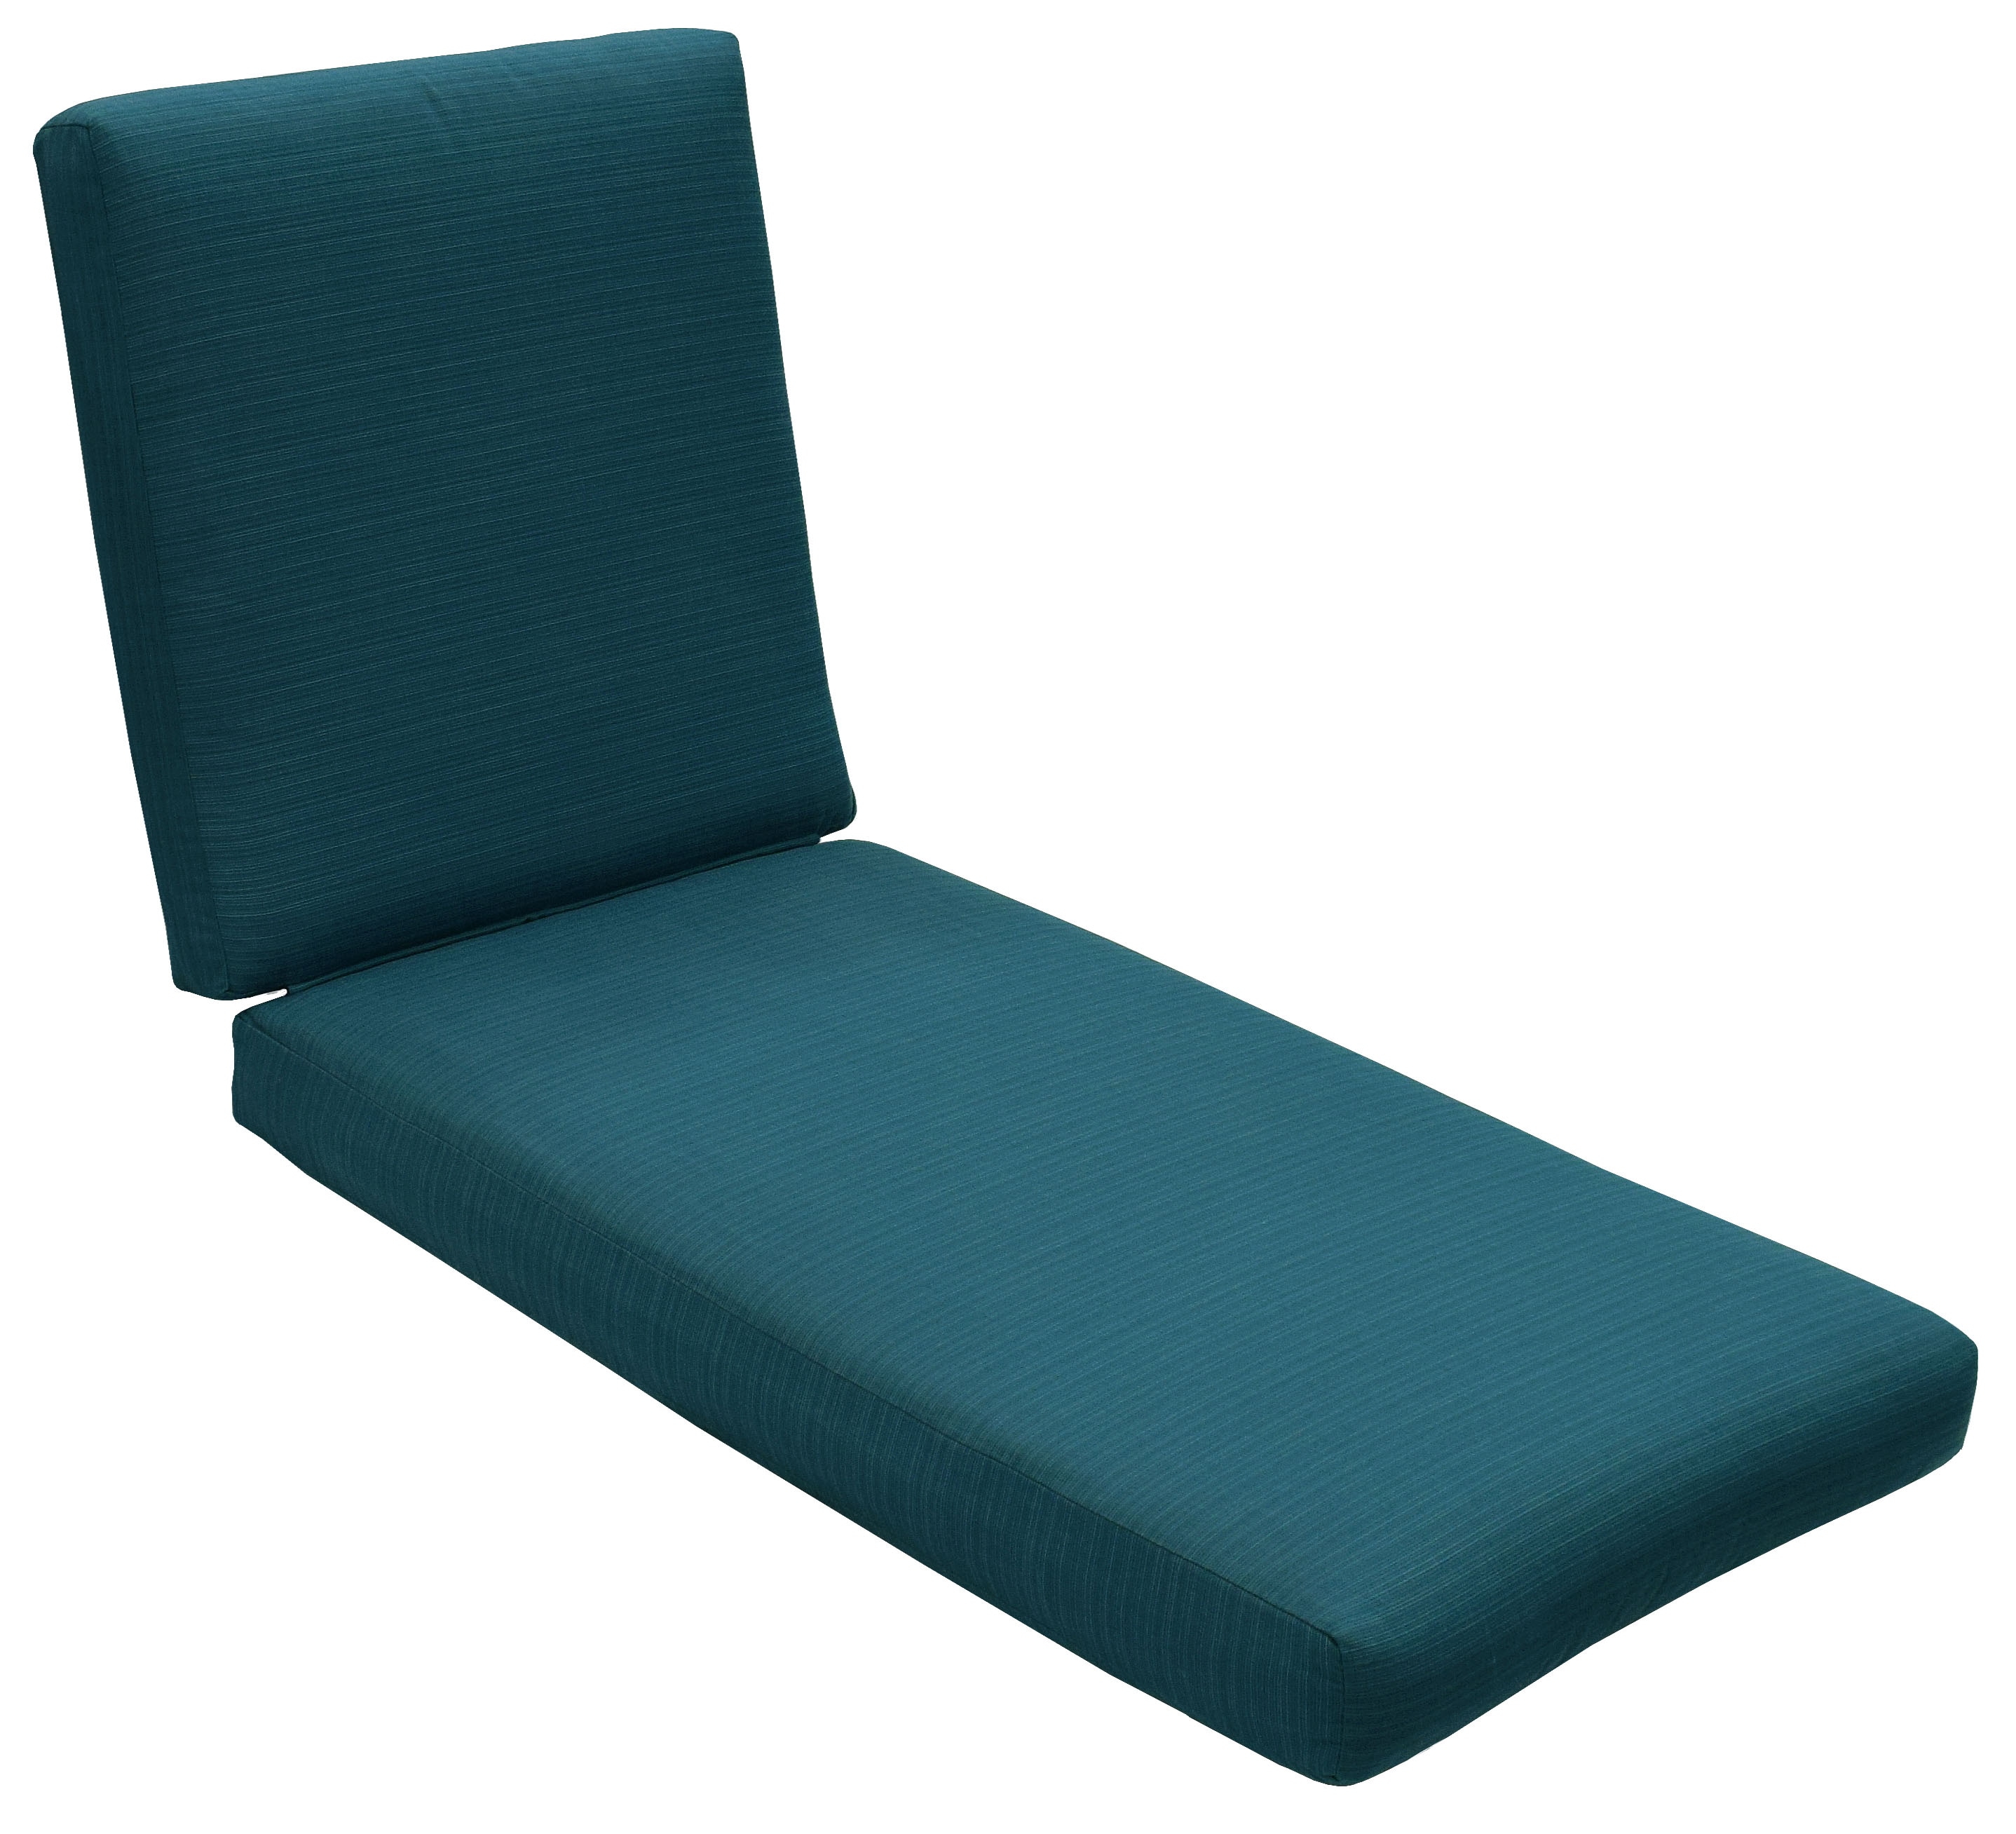 Reclining Chair Cushion - Sustainable Furniture